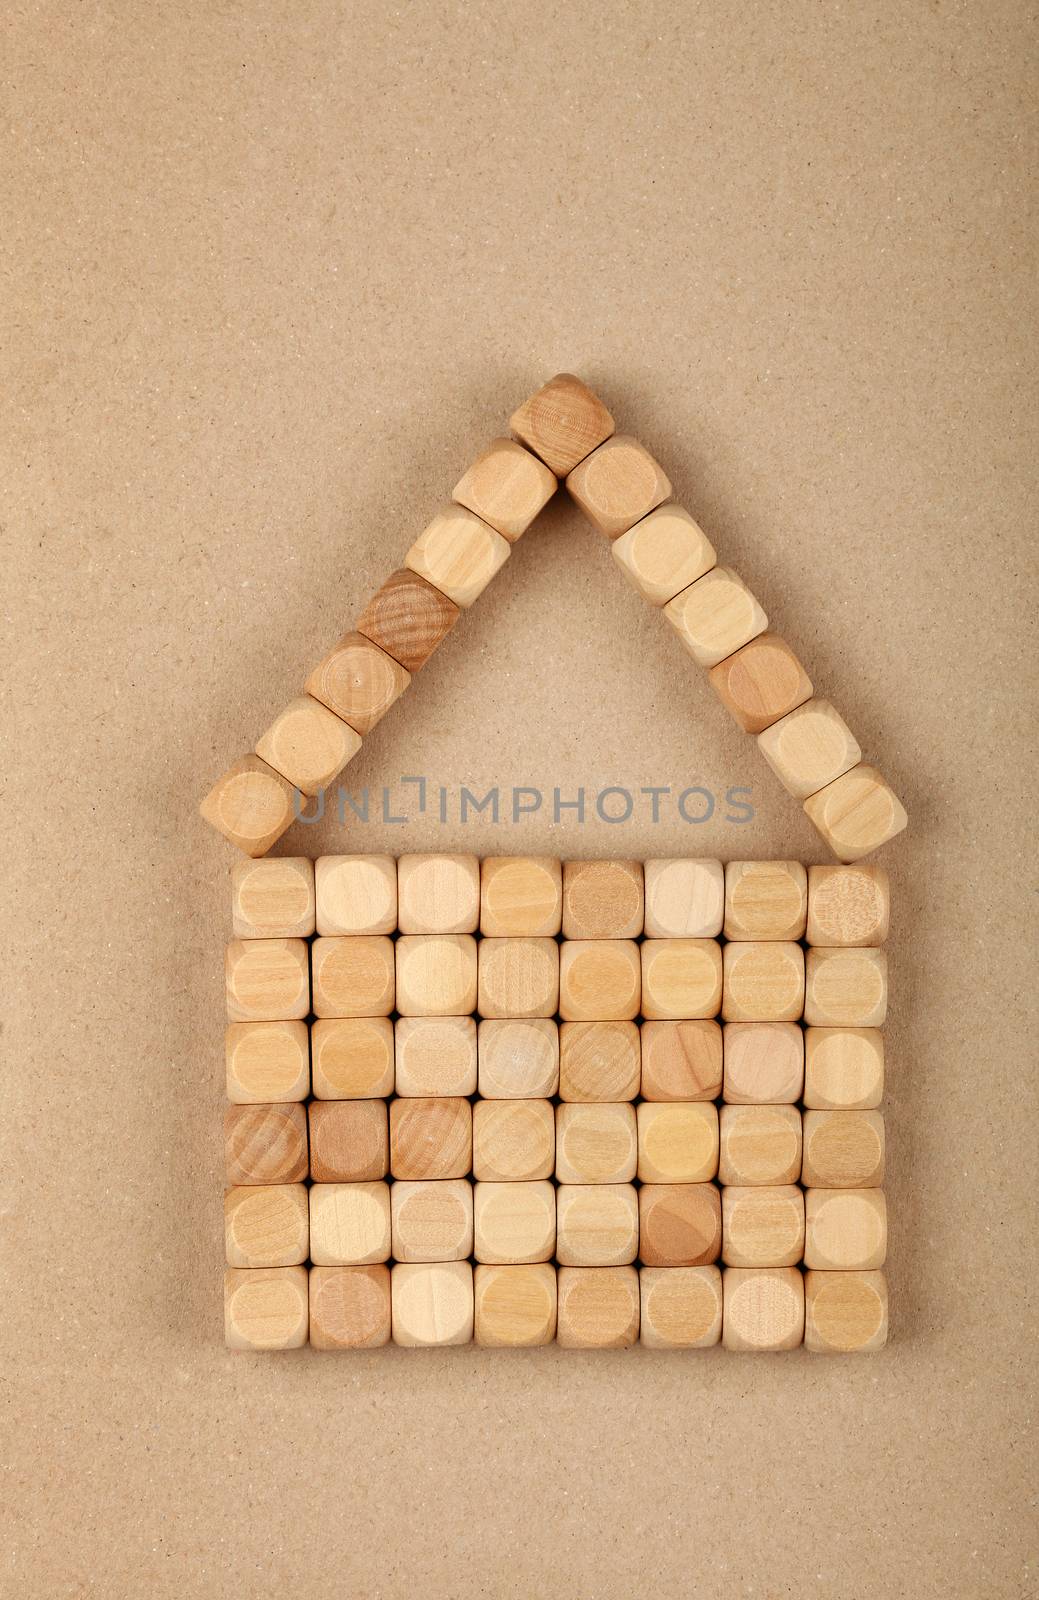 Close up wooden toy building blocks in shape of house over brown paper parchment  background copy space